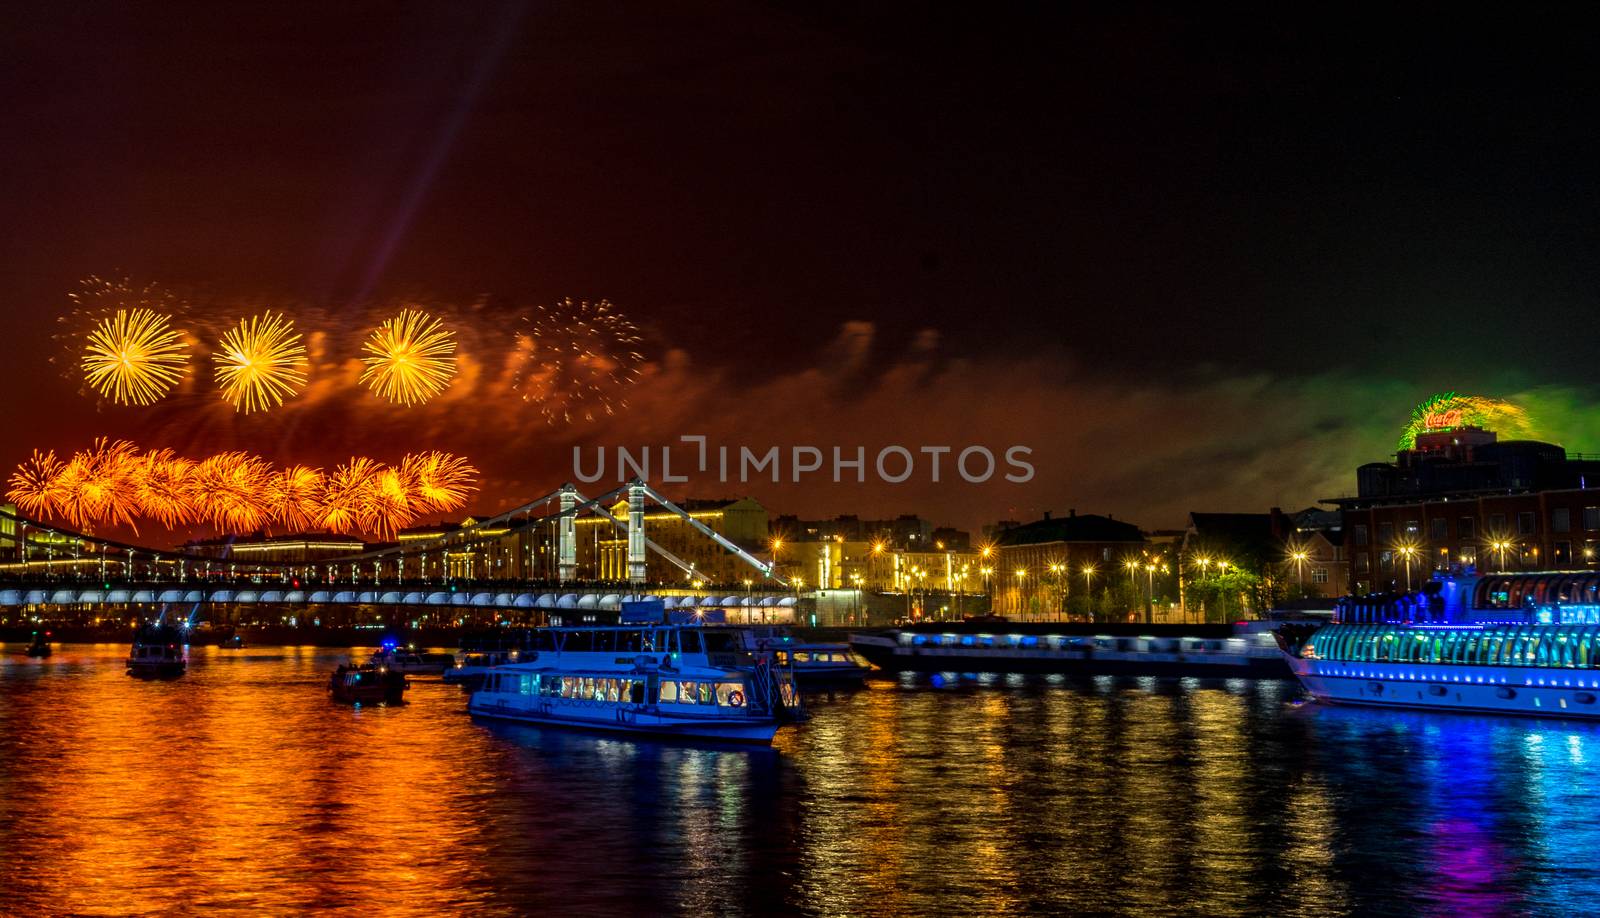 Fireworks over water by fifg